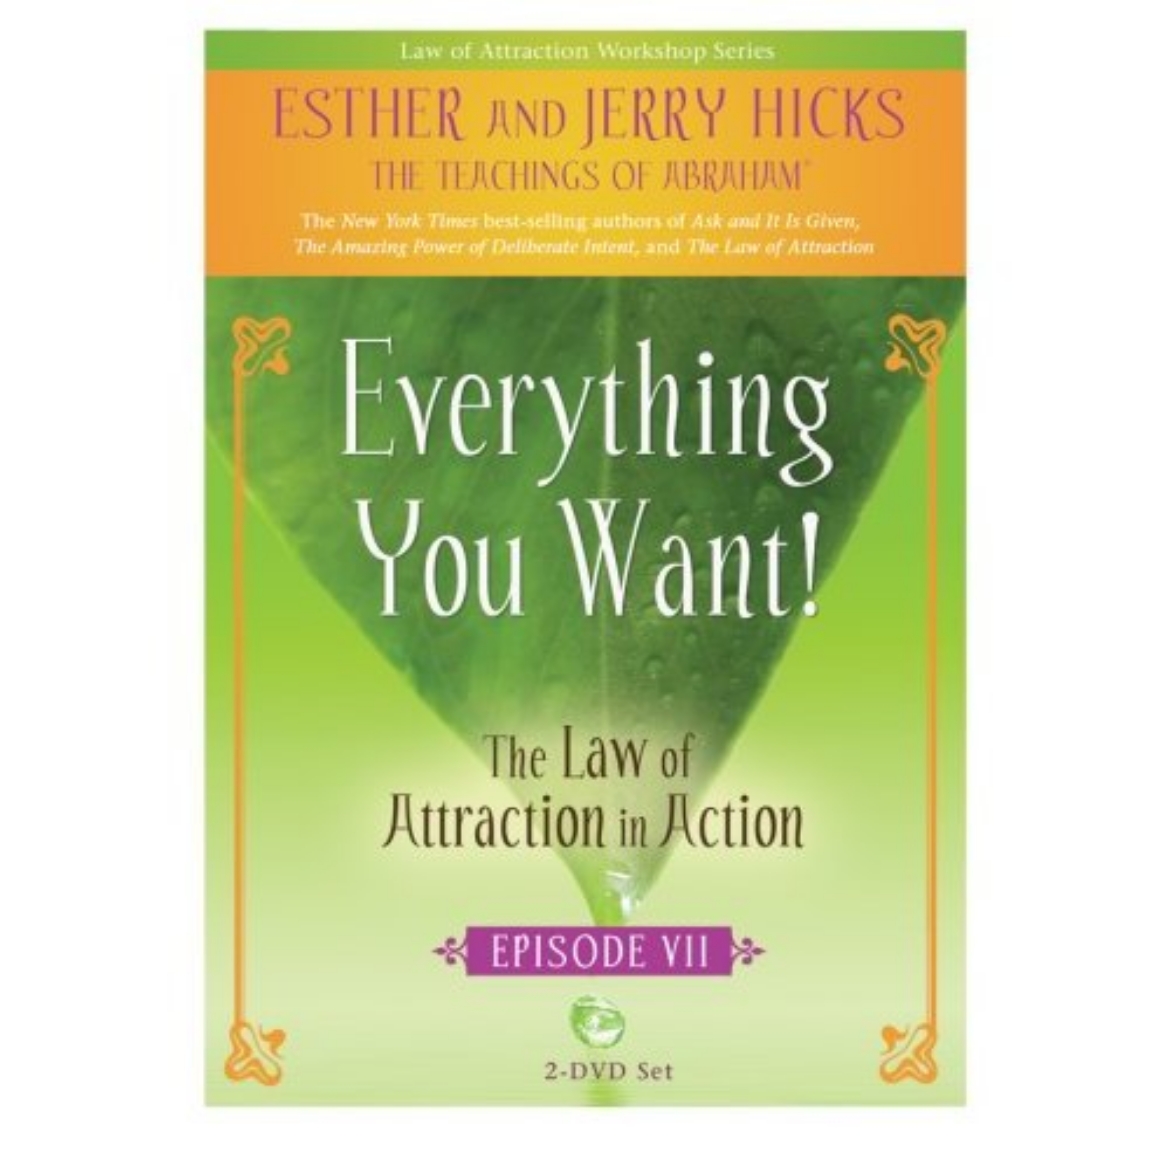 Picture of Everything you want! - the law of attraction in action, episode vii